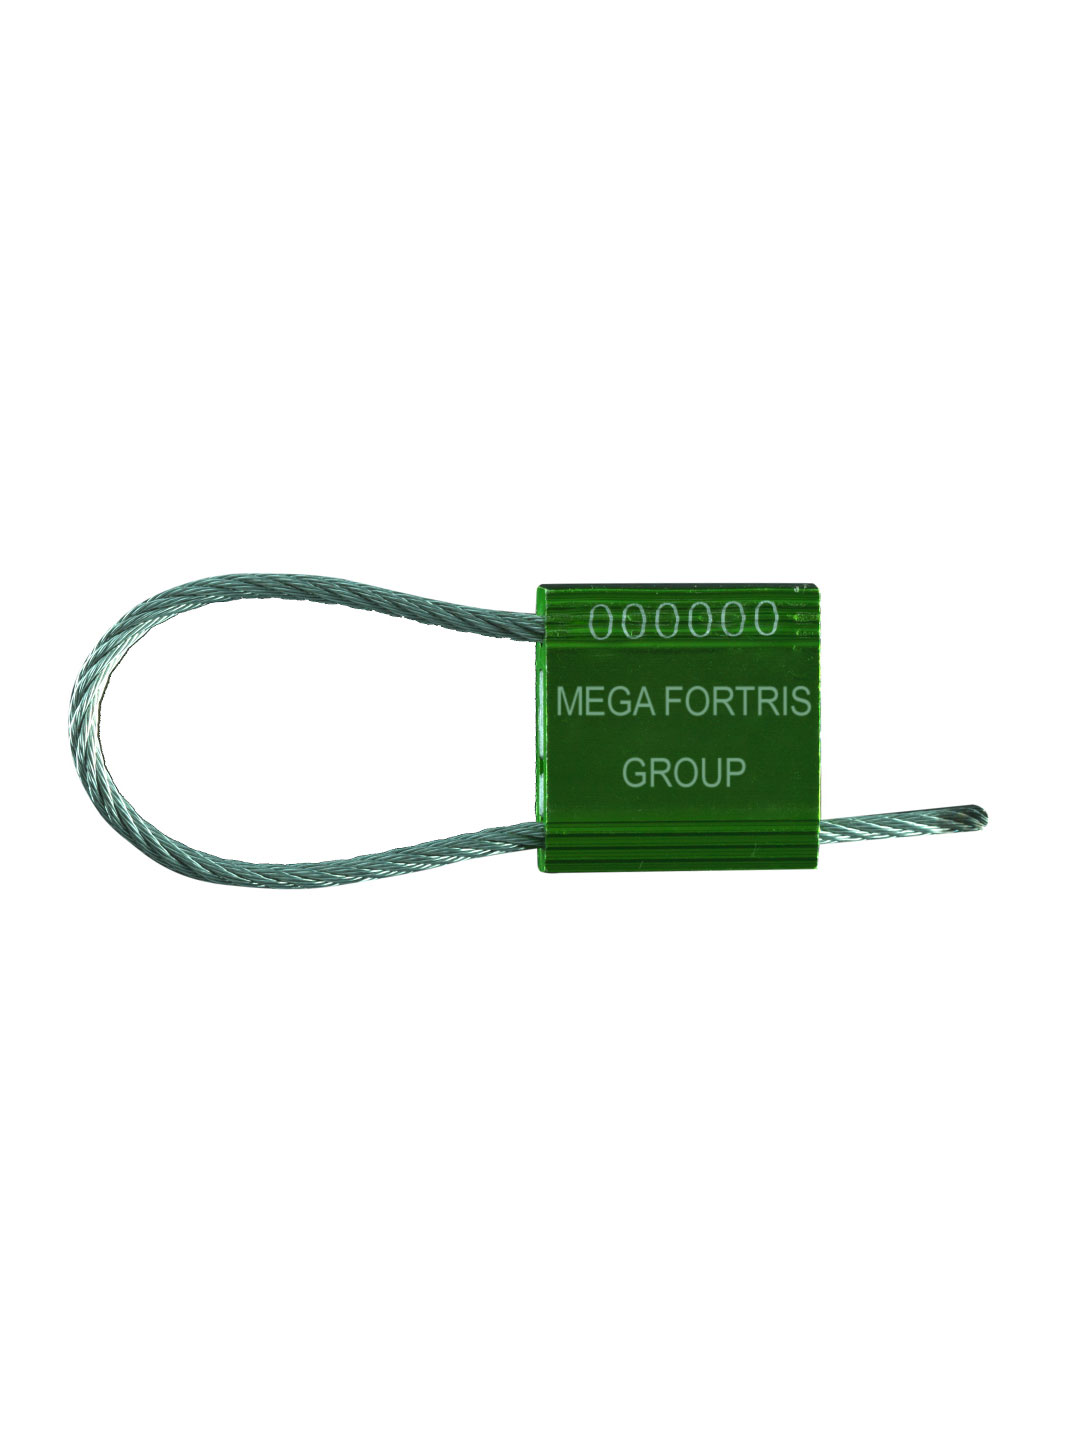 MCL 350 High Security Cable Seal